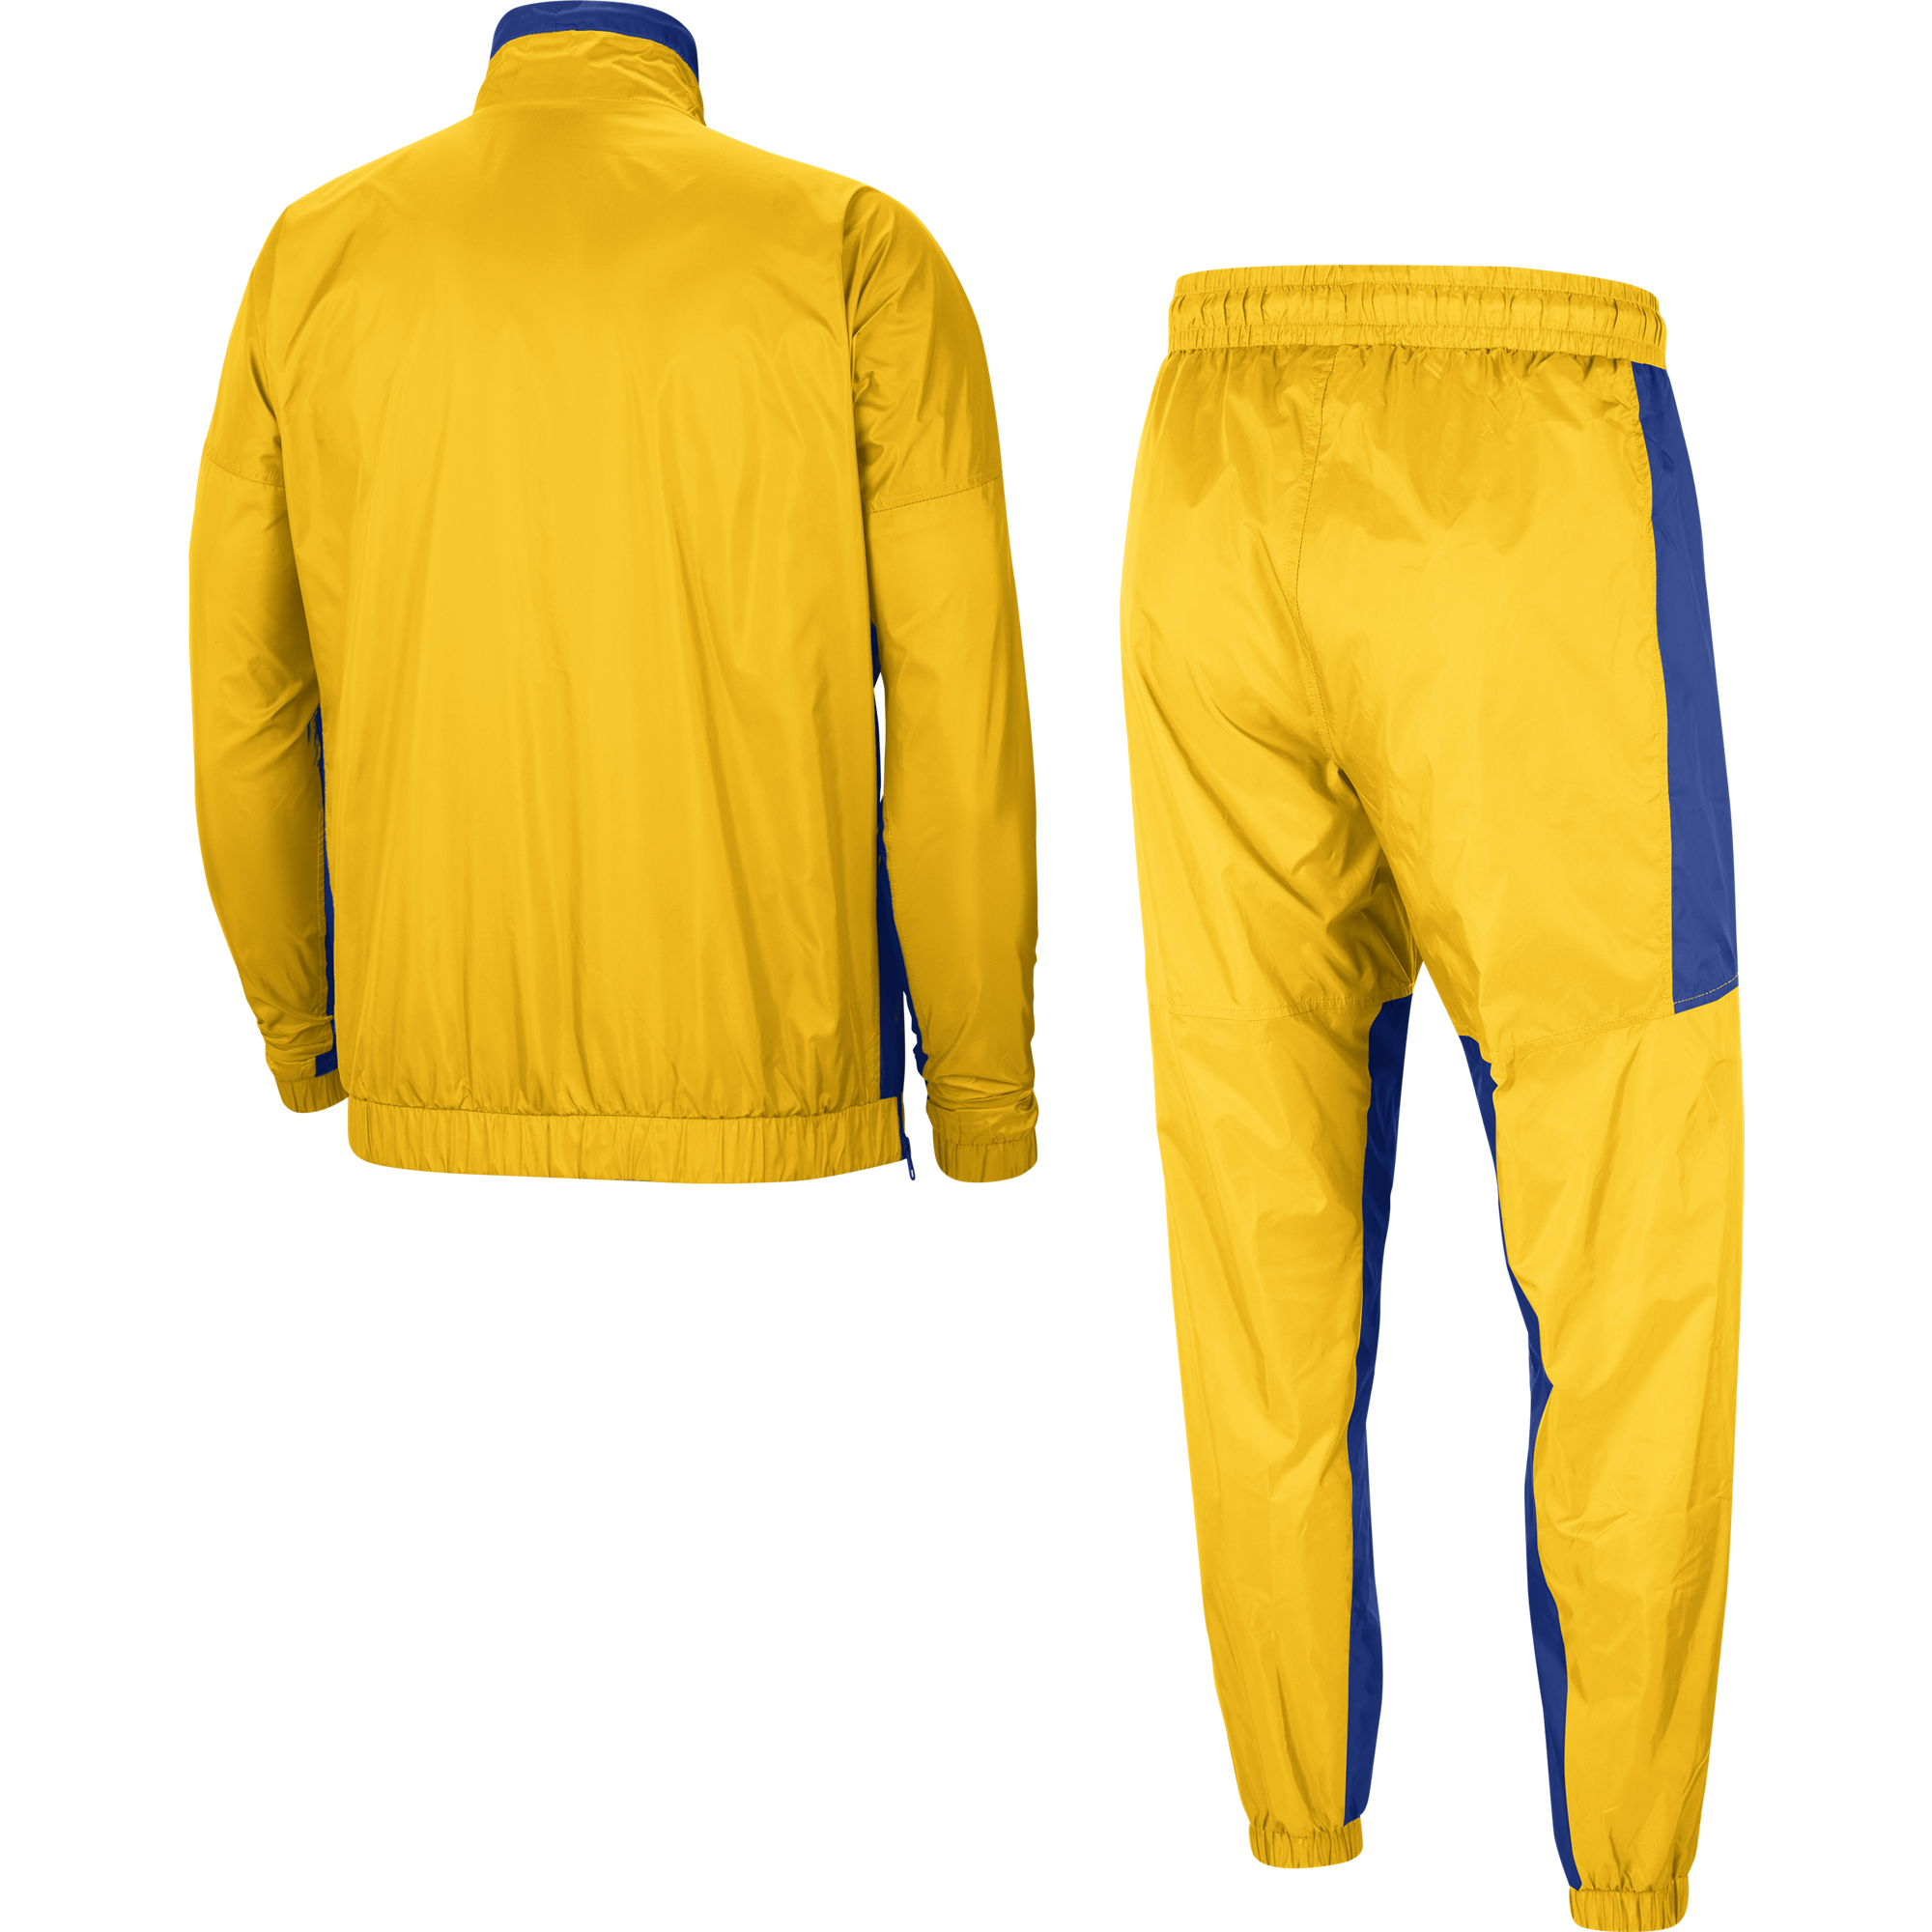 golden state tracksuit